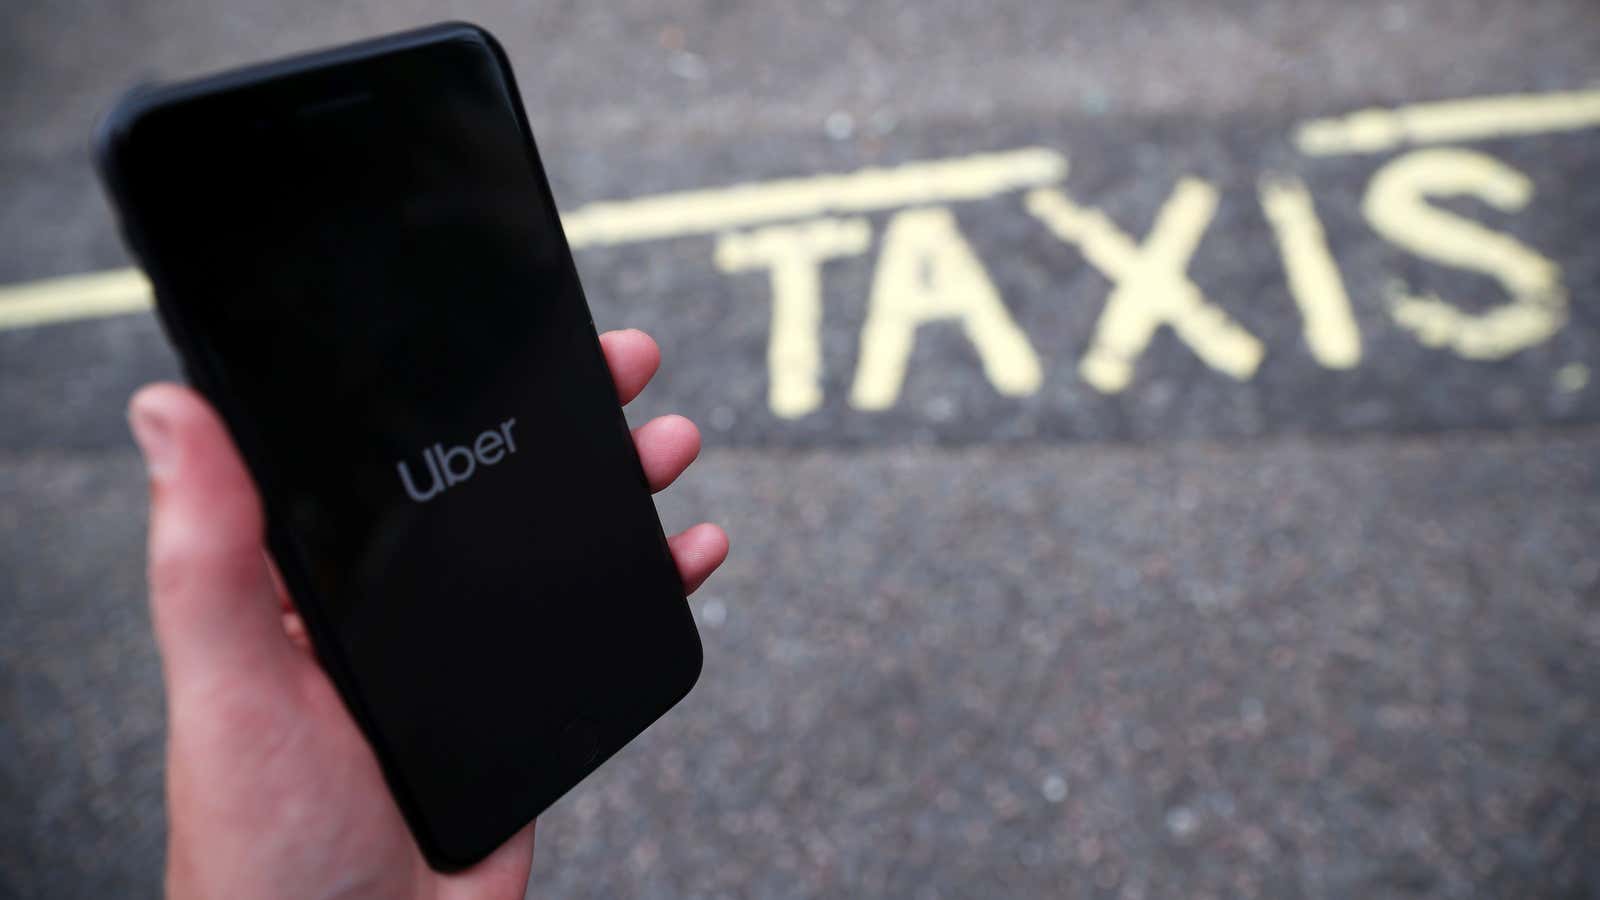 You will soon be able to order alcohol via Uber.